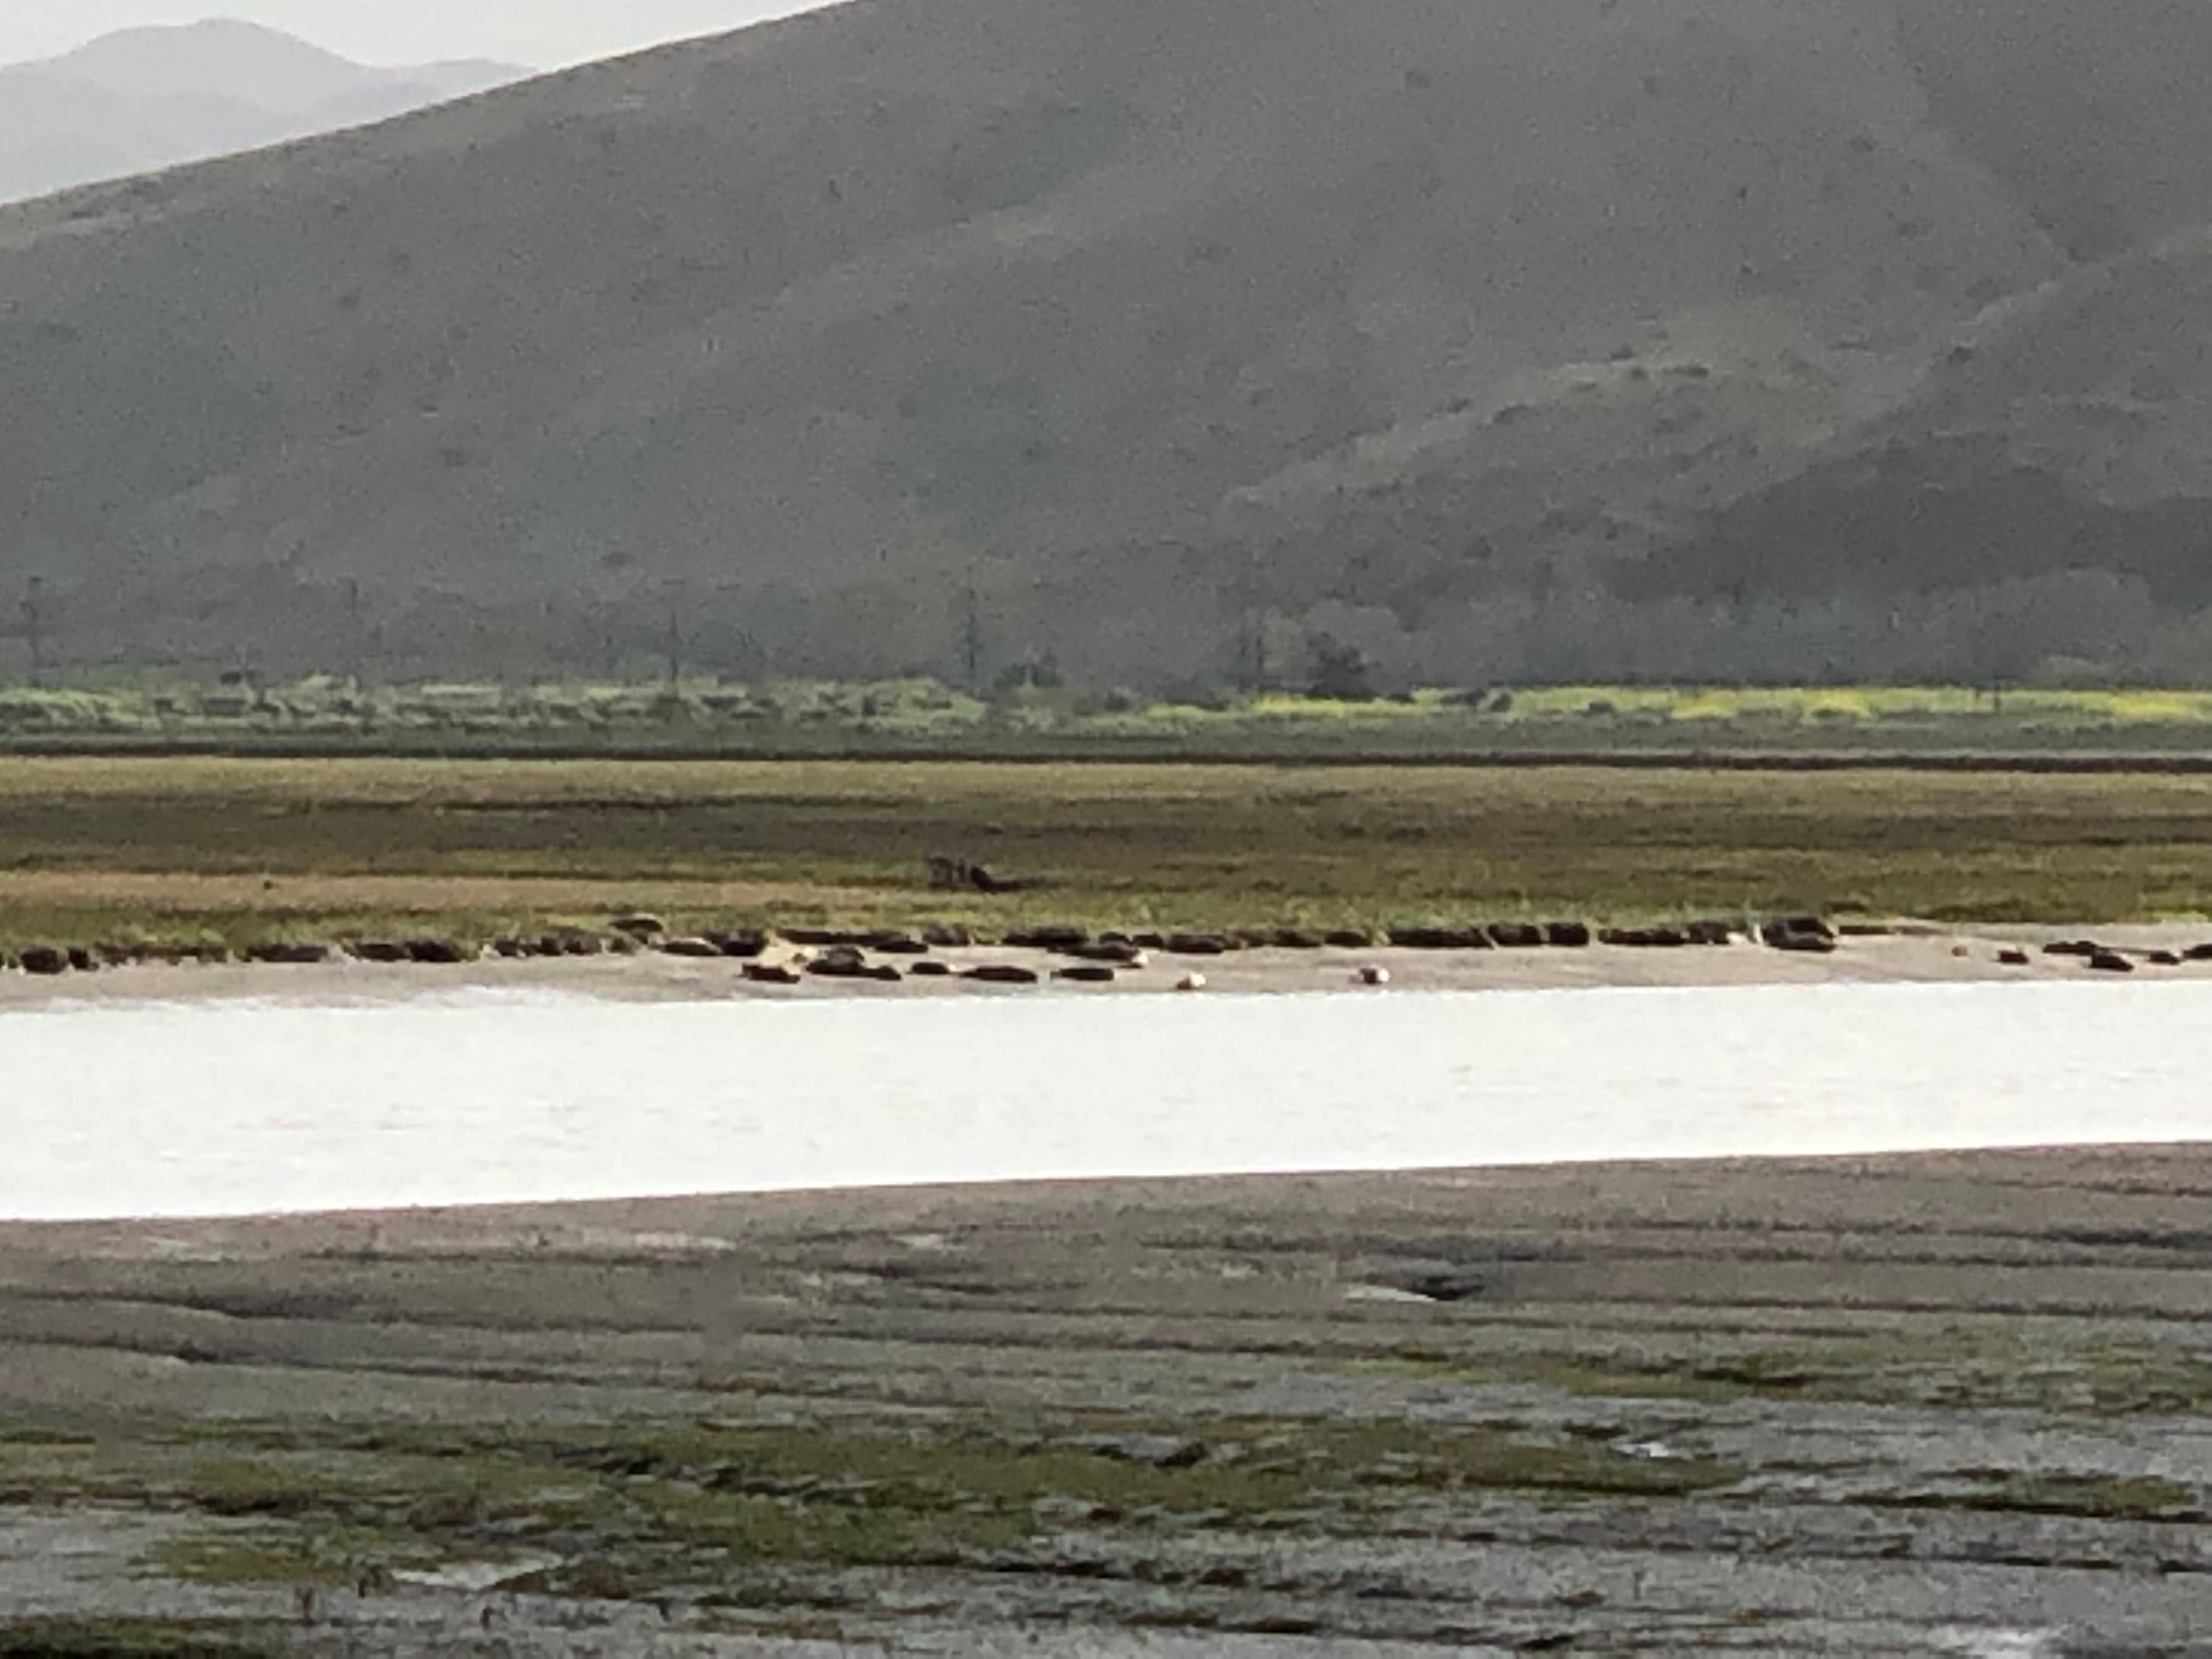 Seals beached in the wetland.